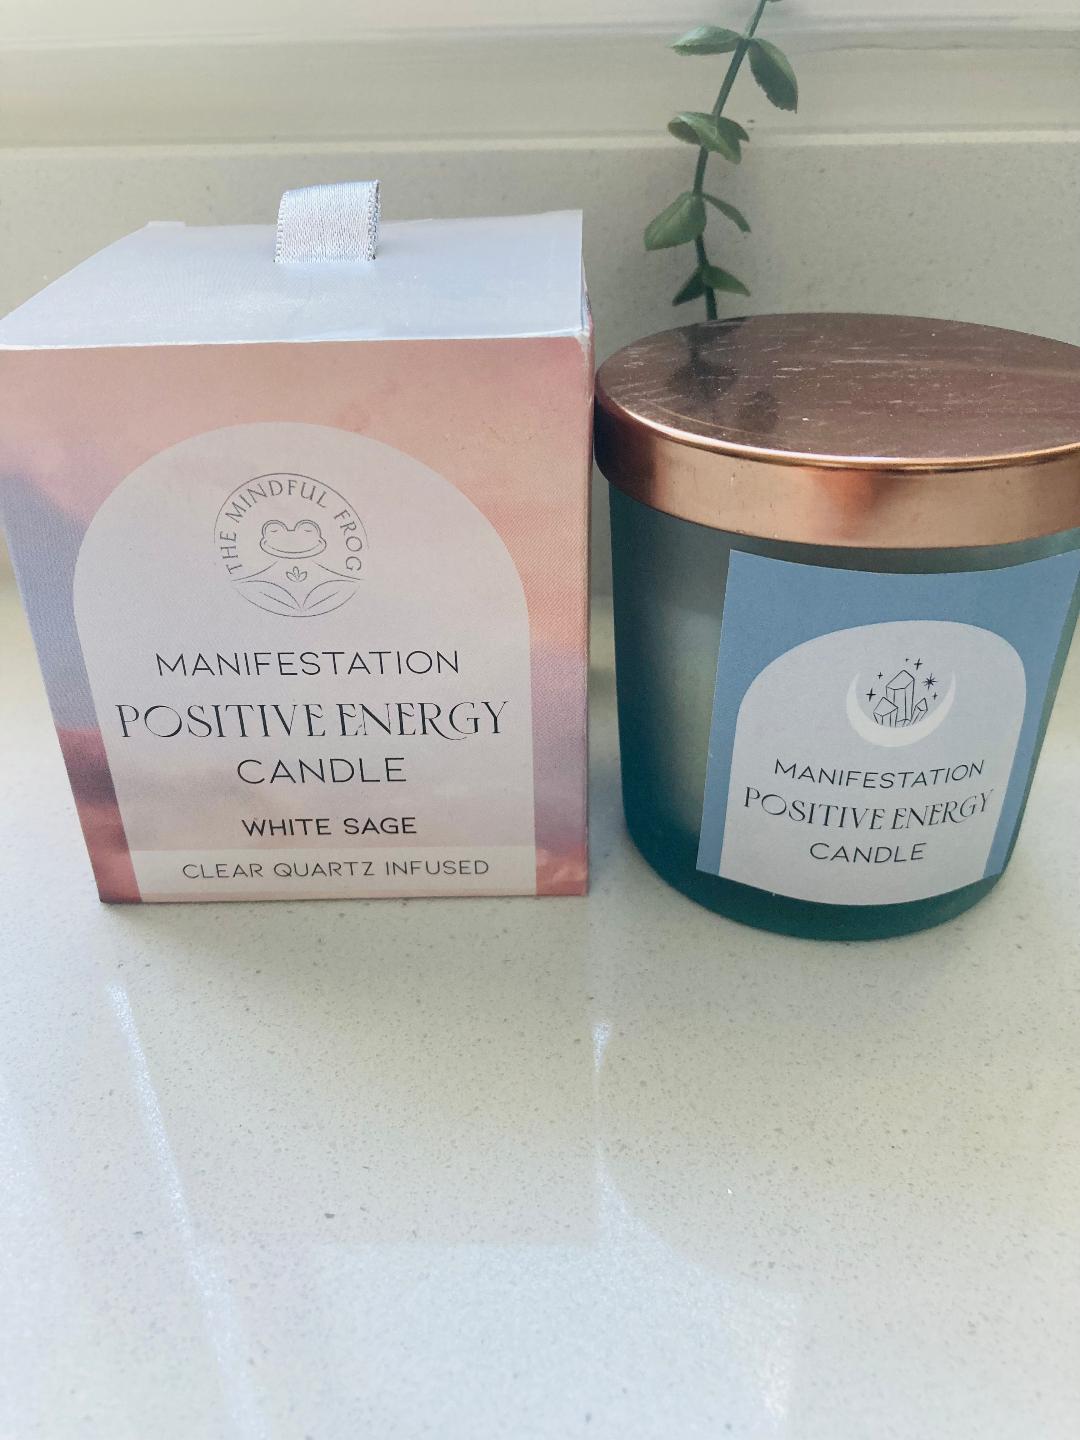 Crystal Chip Manifesting Positive Energy Candle